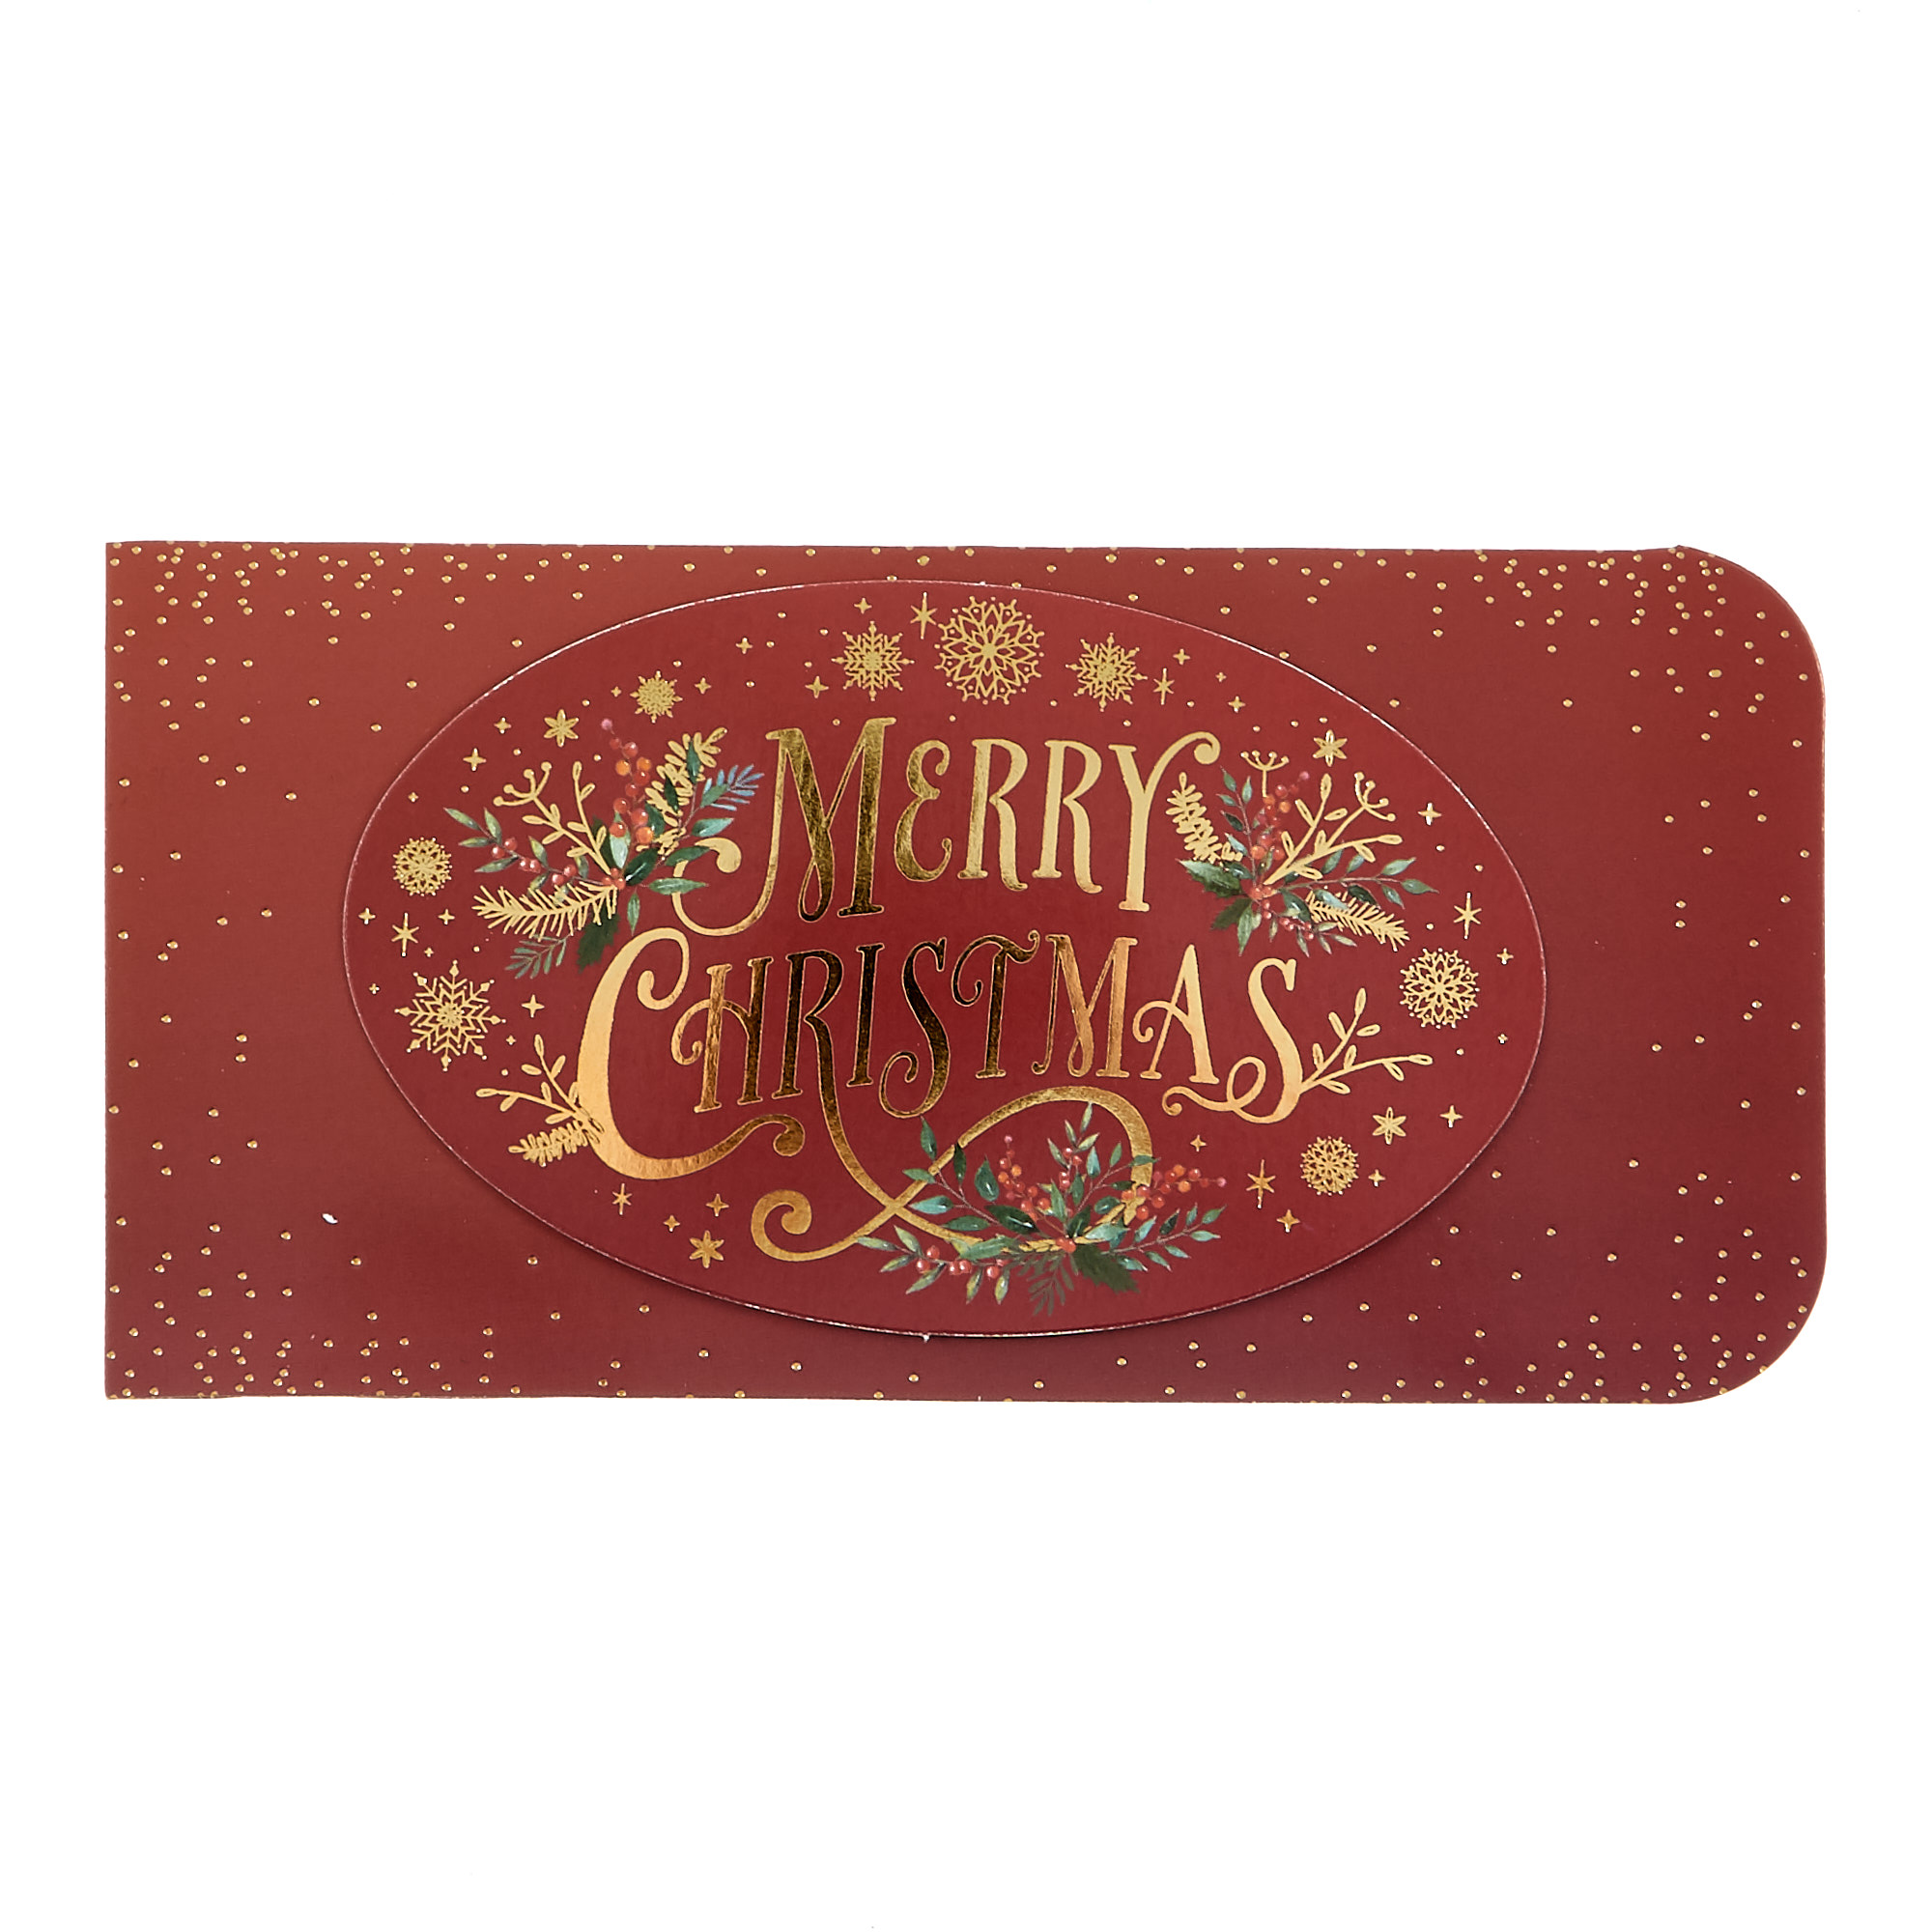 Handcrafted Merry Christmas Money Wallets - Pack of 3